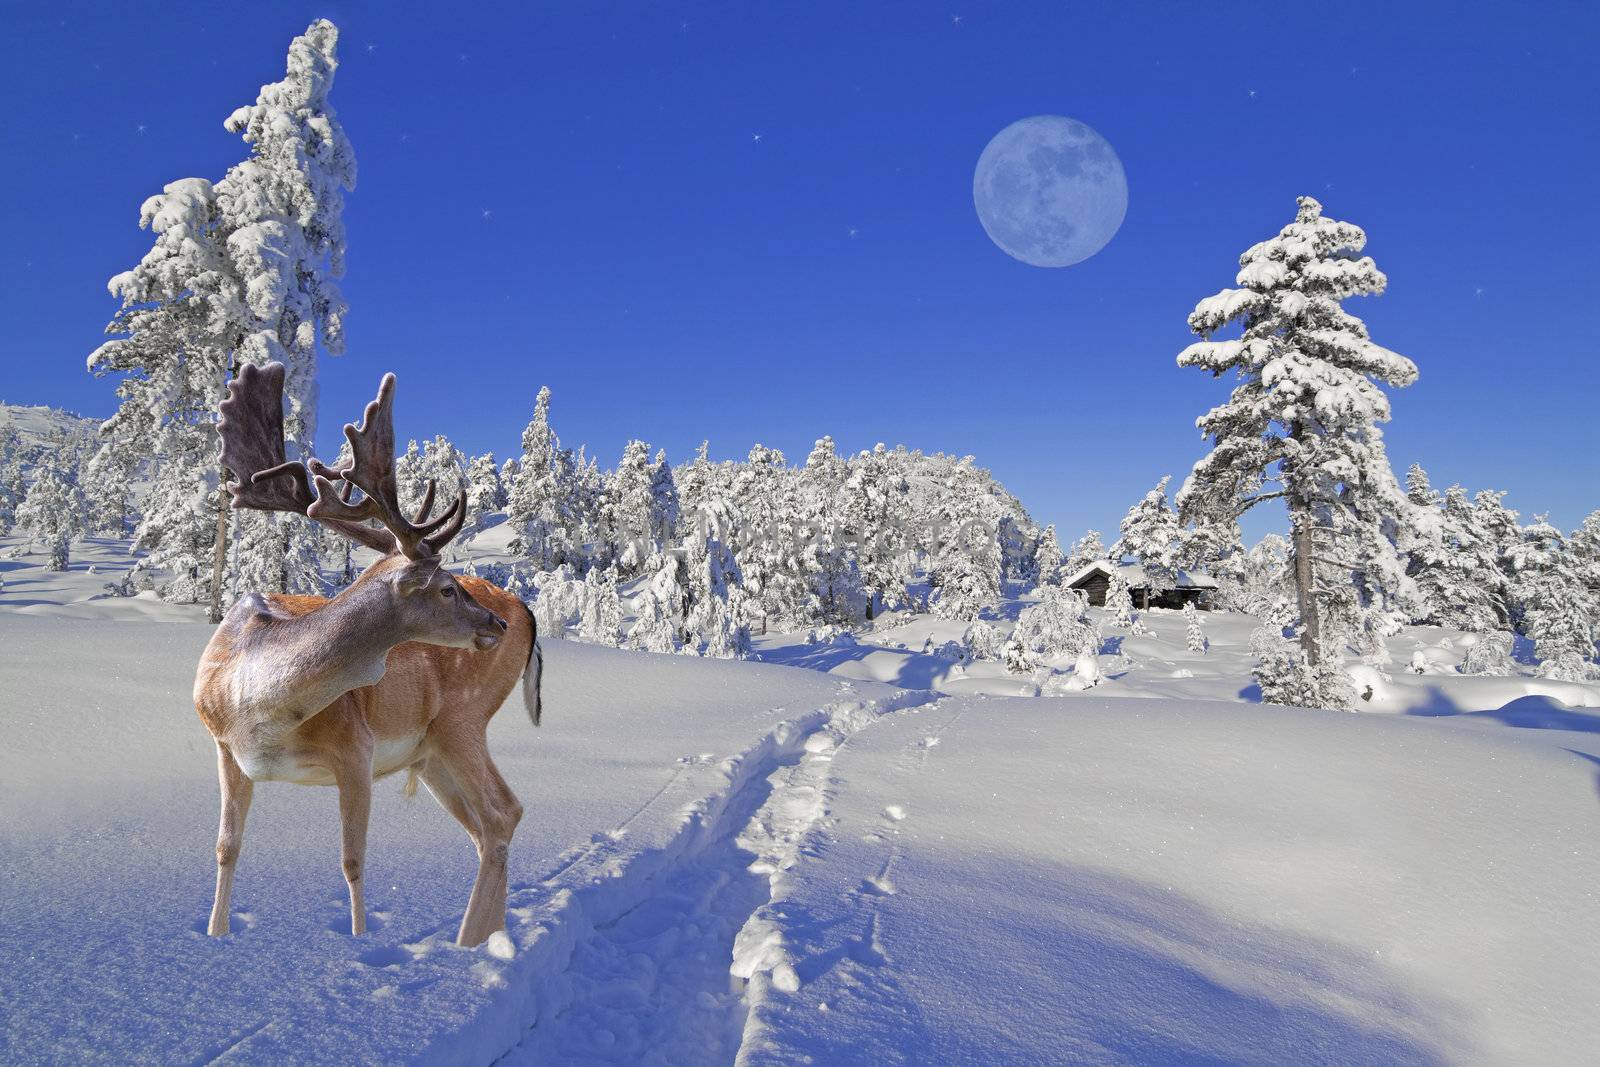 A reindeer is waiting for Santa at the North Pole